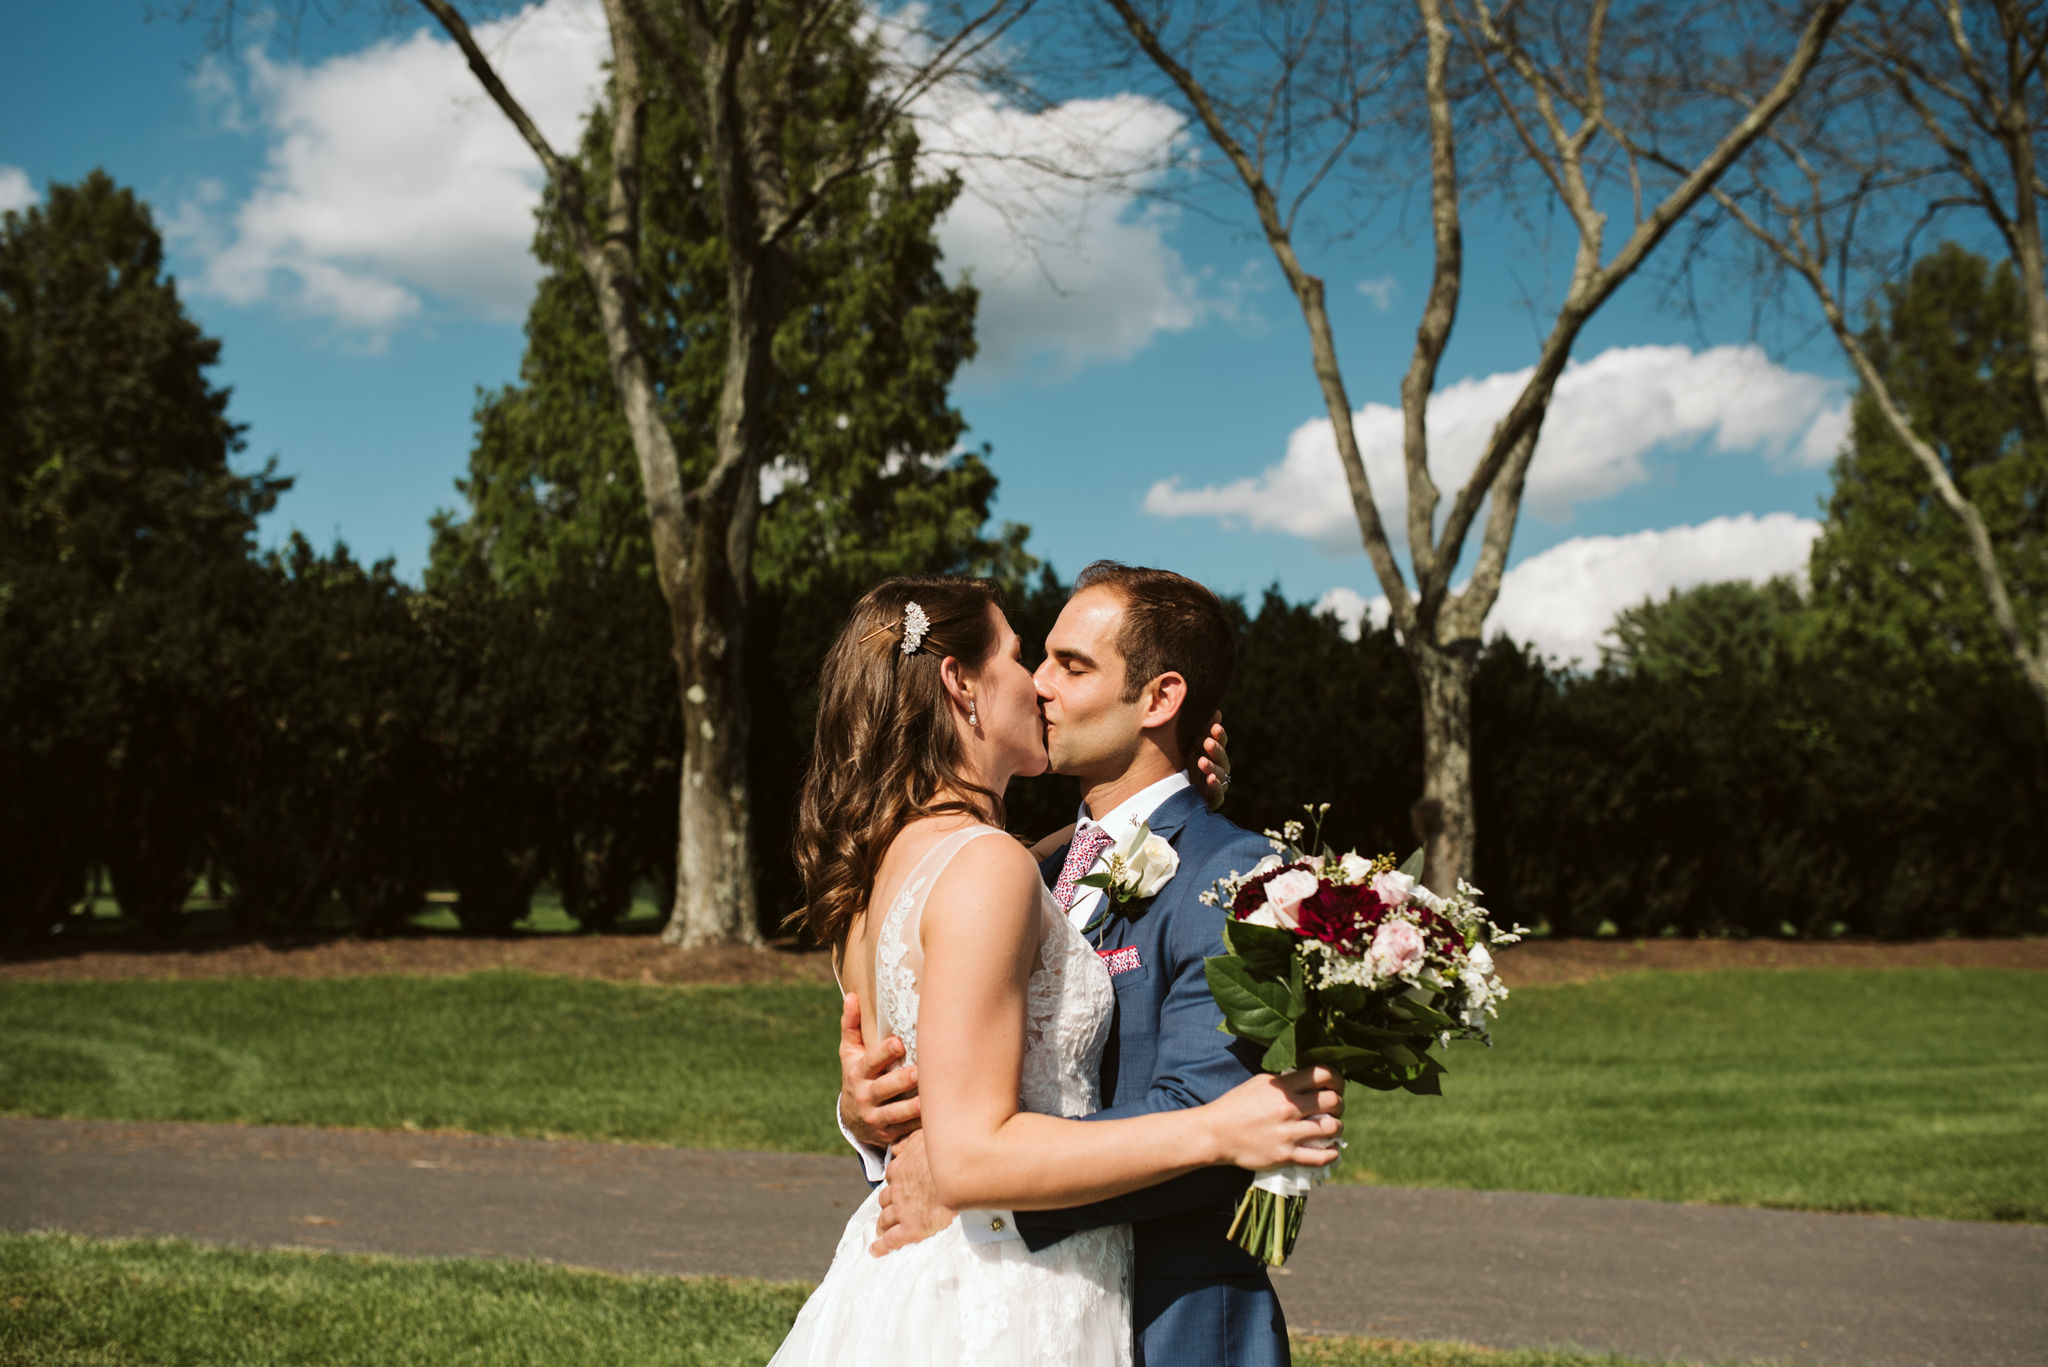  Phoenix Maryland, Baltimore Wedding Photographer, Eagle’s Nest Country Club, Classic, Romantic, Bride and Groom Kissing Outside, Sunshine, Lace BHLDN Dress, Dundalk Florist, Gaby Vinas 